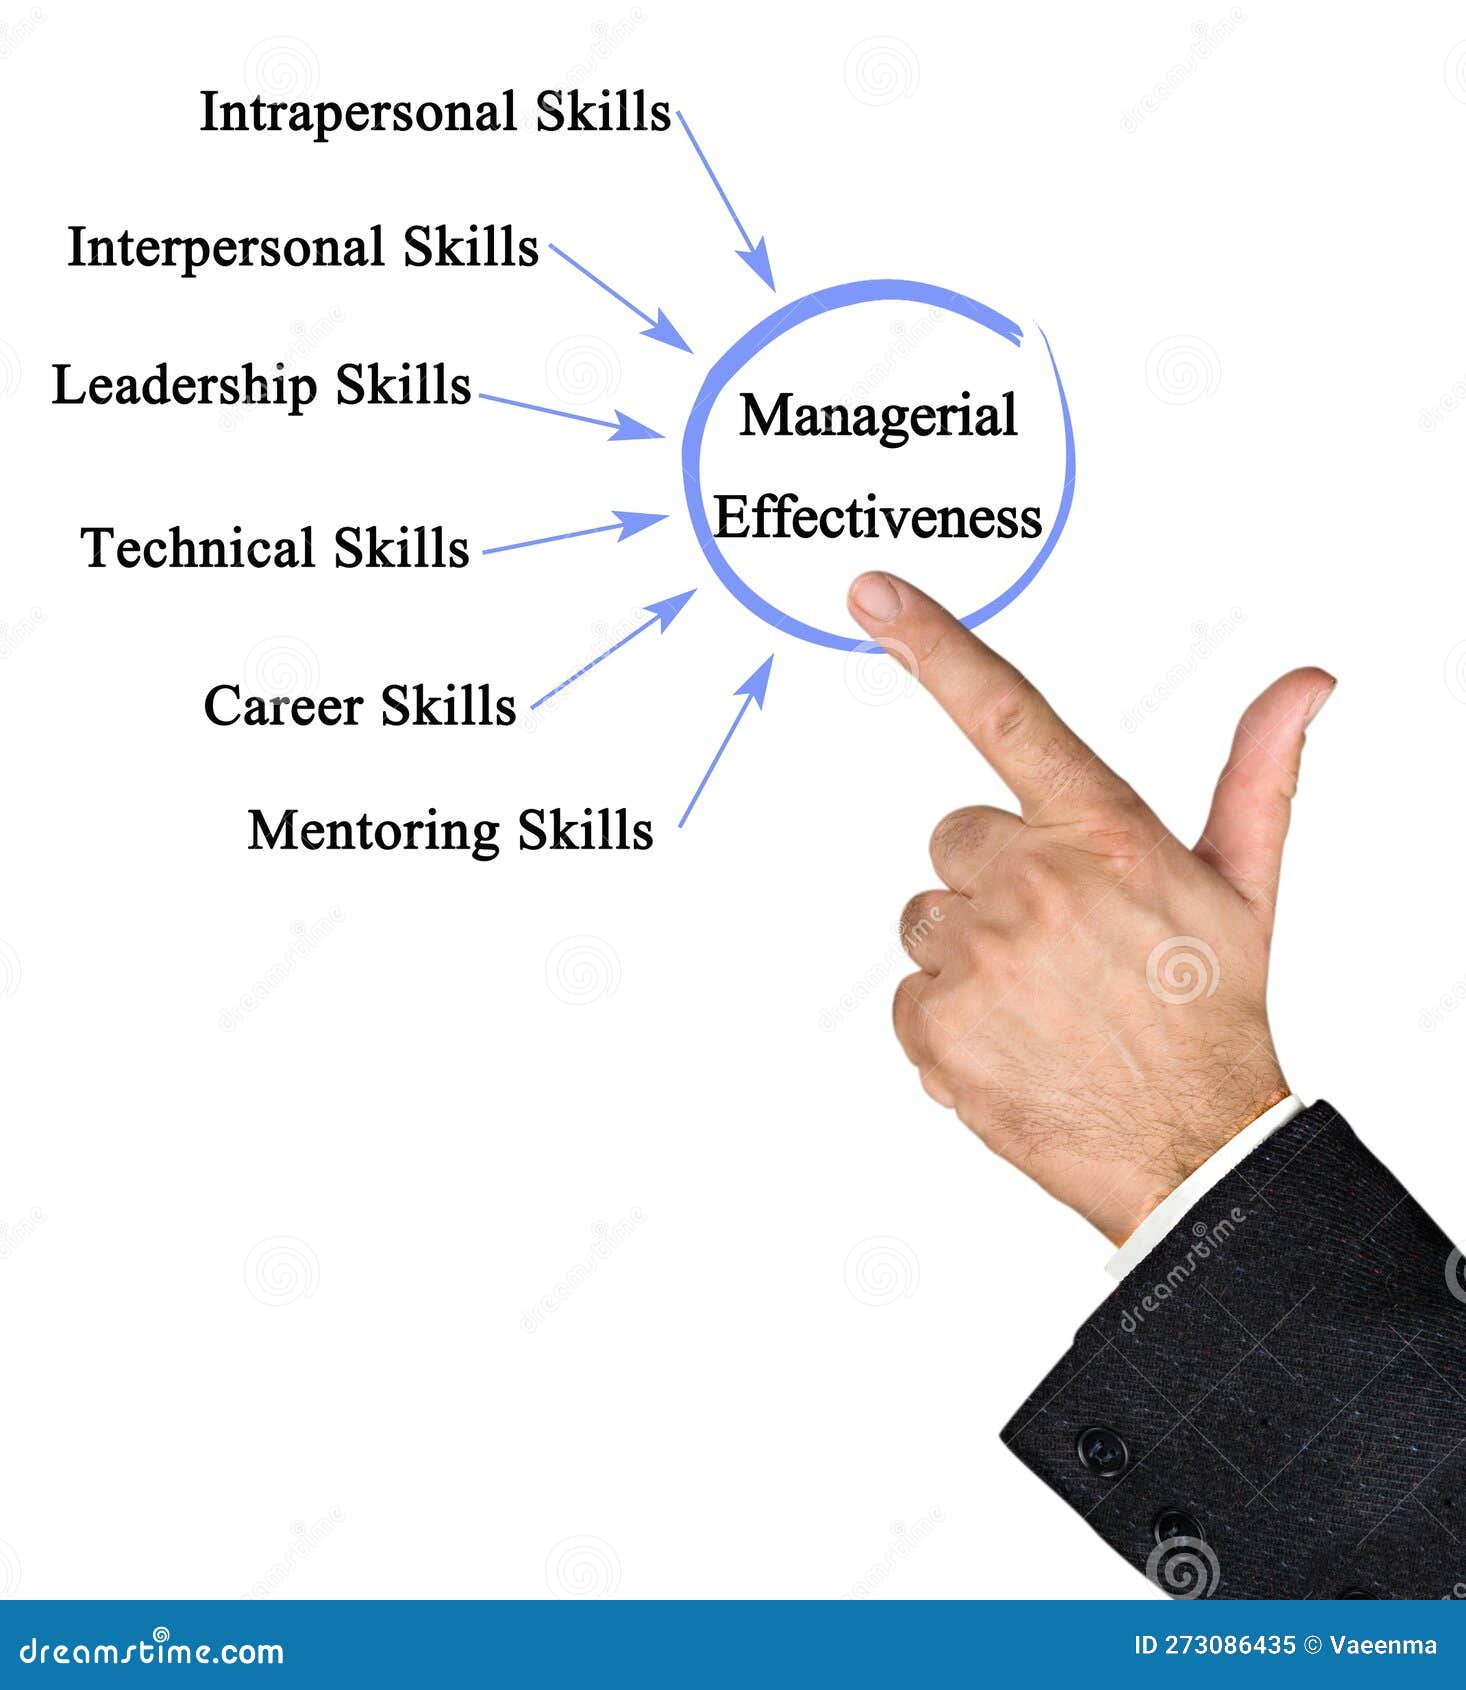 drivers of managerial effectiveness